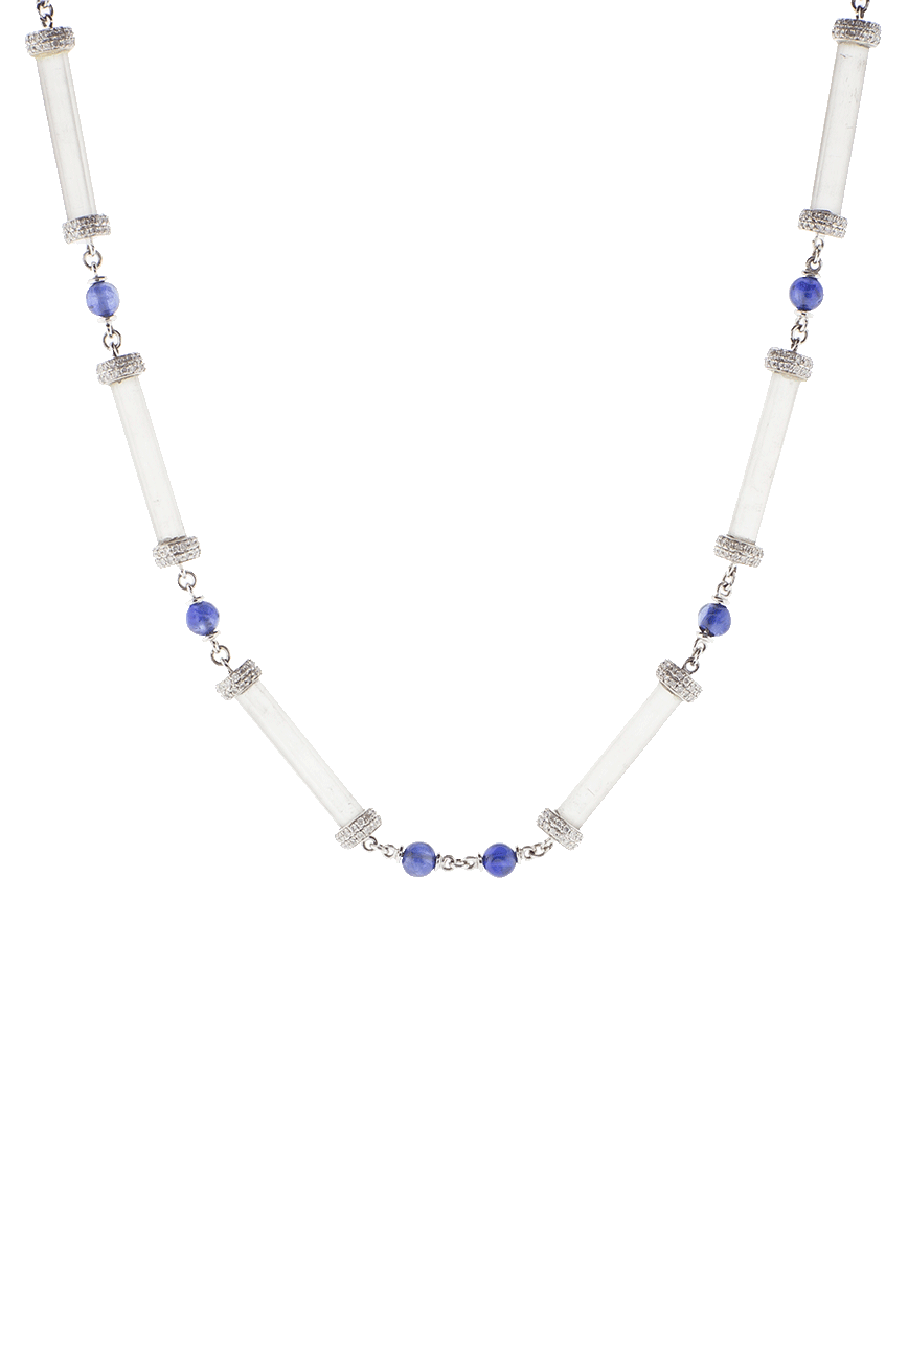 ARUNASHI-Crystal Necklace With Sapphire And Diamonds-WHITE GOLD